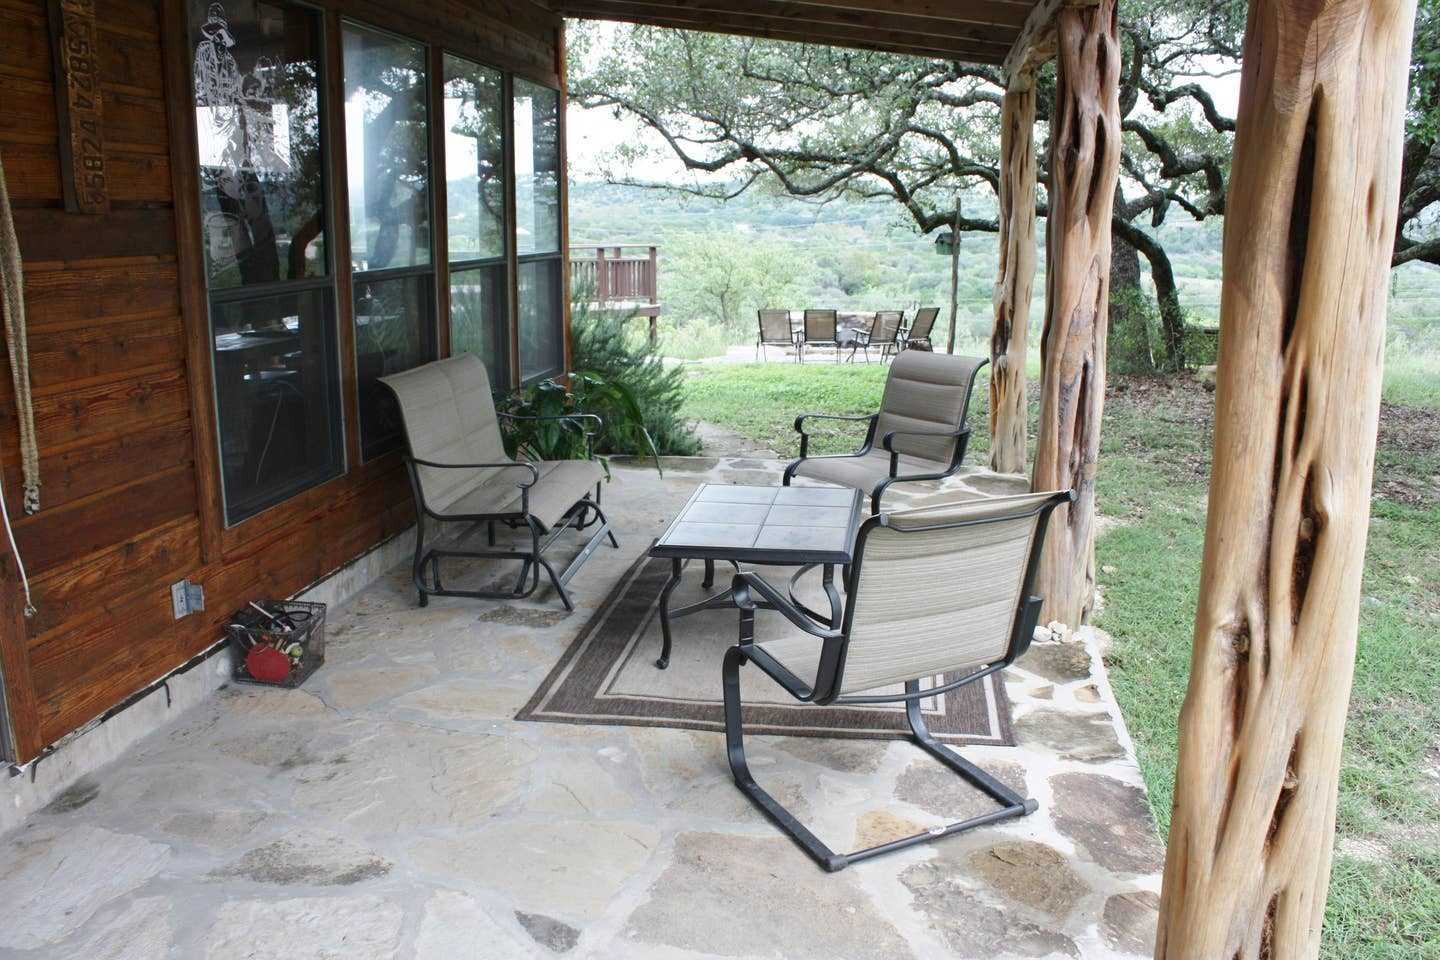                                                 Comfy outdoor furniture makes the shaded patio a great place for conversation and wildlife watching.